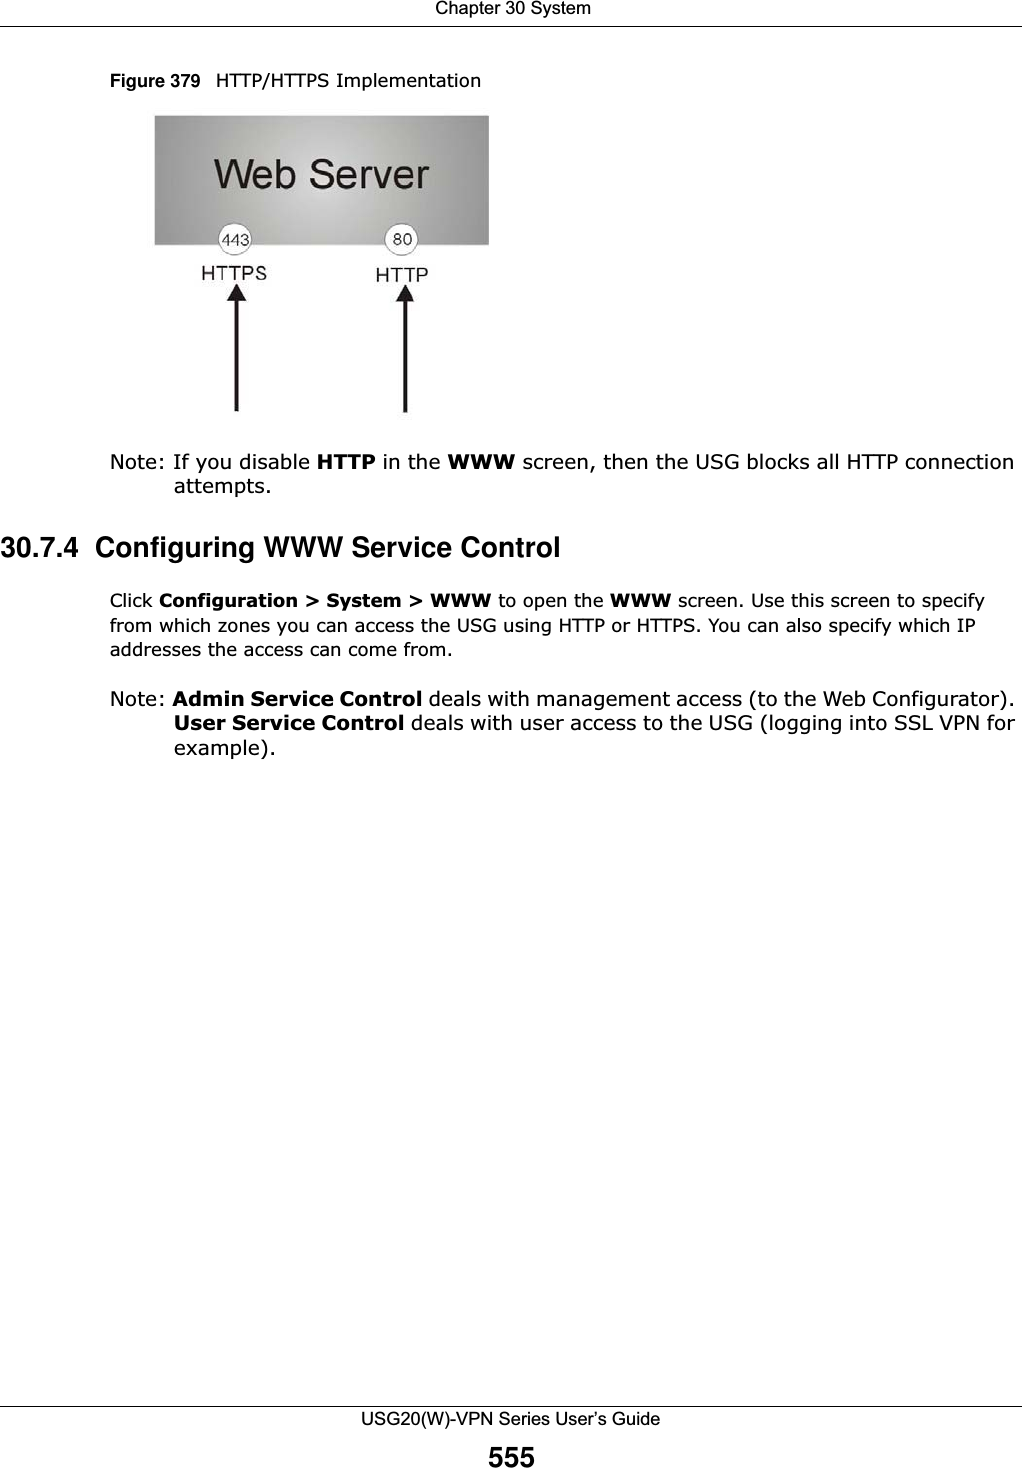  Chapter 30 SystemUSG20(W)-VPN Series User’s Guide555Figure 379   HTTP/HTTPS ImplementationNote: If you disable HTTP in the WWW screen, then the USG blocks all HTTP connection attempts.30.7.4  Configuring WWW Service ControlClick Configuration &gt; System &gt; WWW to open the WWW screen. Use this screen to specify from which zones you can access the USG using HTTP or HTTPS. You can also specify which IP addresses the access can come from.Note: Admin Service Control deals with management access (to the Web Configurator). User Service Control deals with user access to the USG (logging into SSL VPN for example).